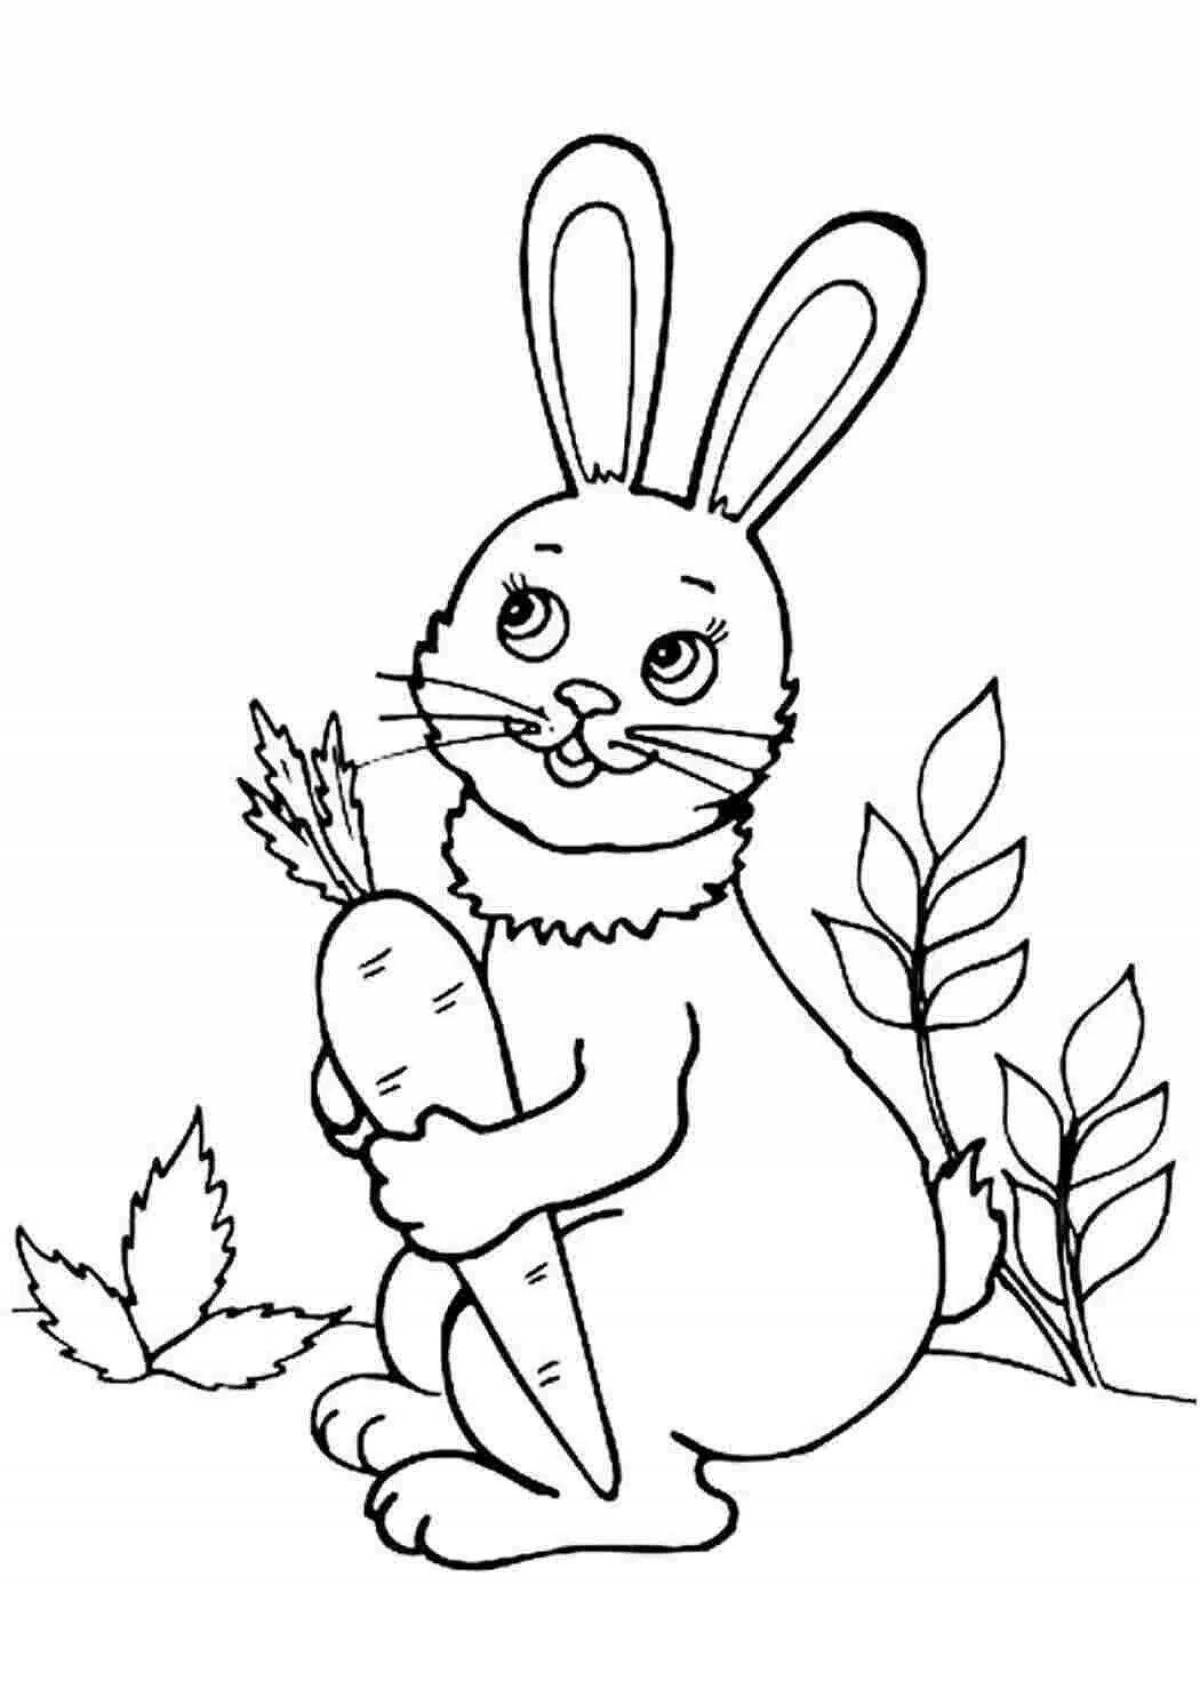 Exotic hare coloring book